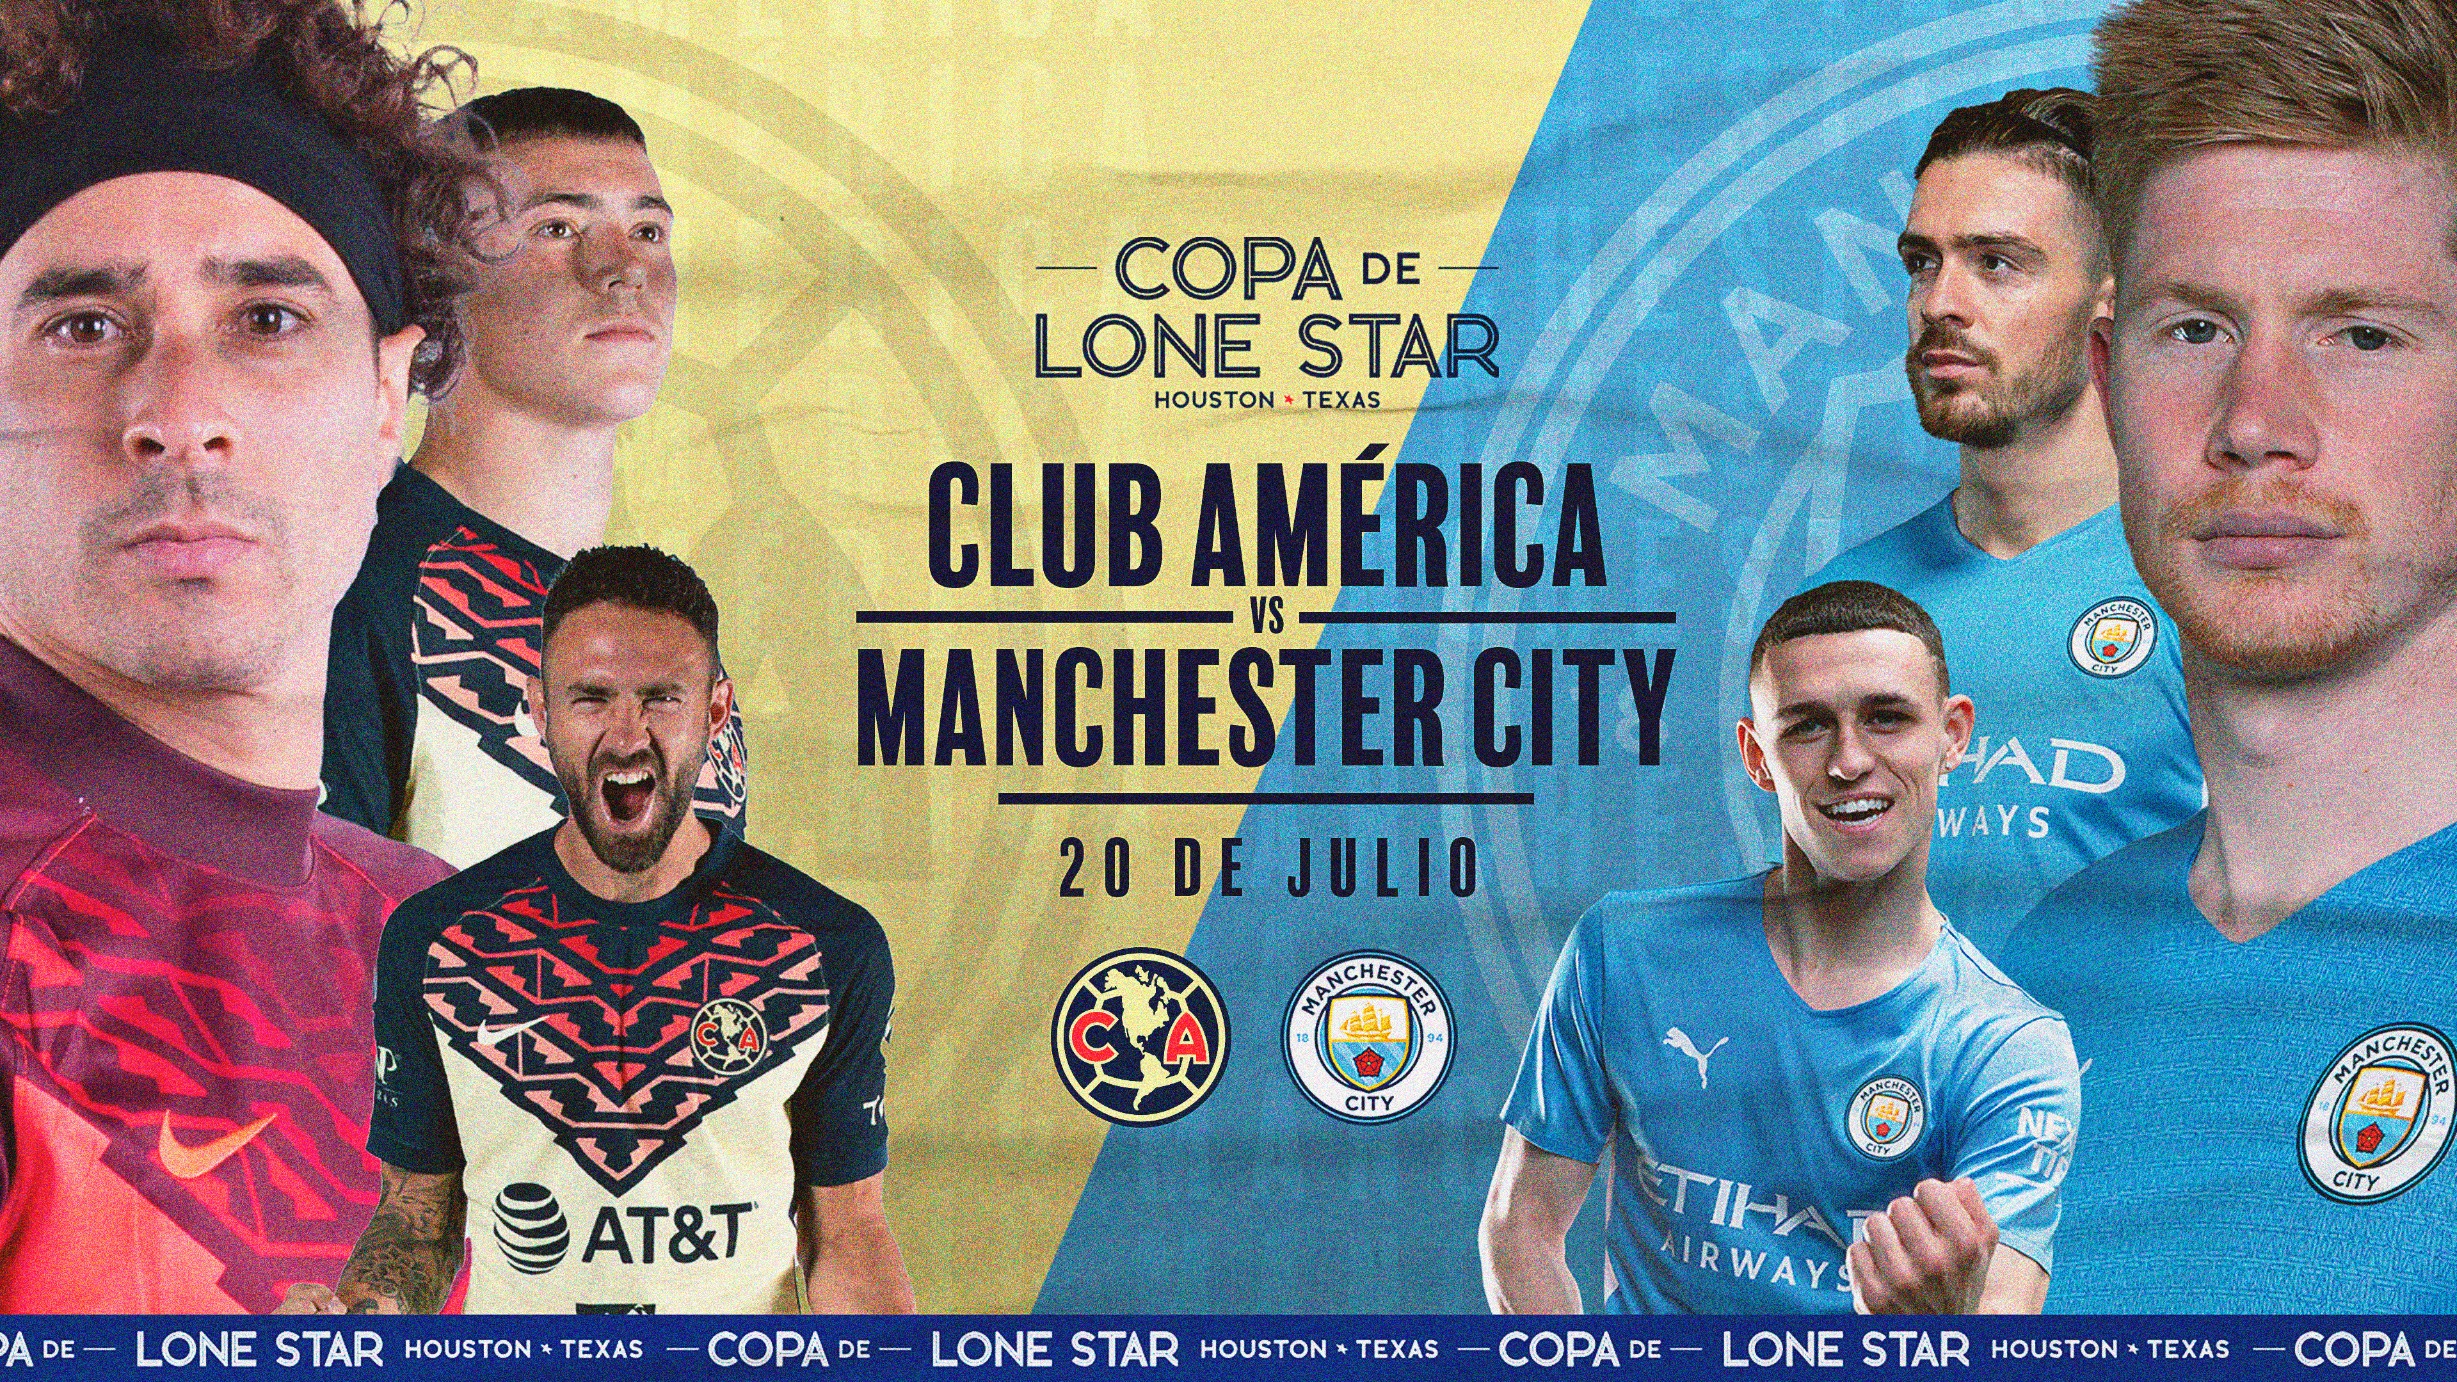 The eagles of America will face Manchester City in a duel of